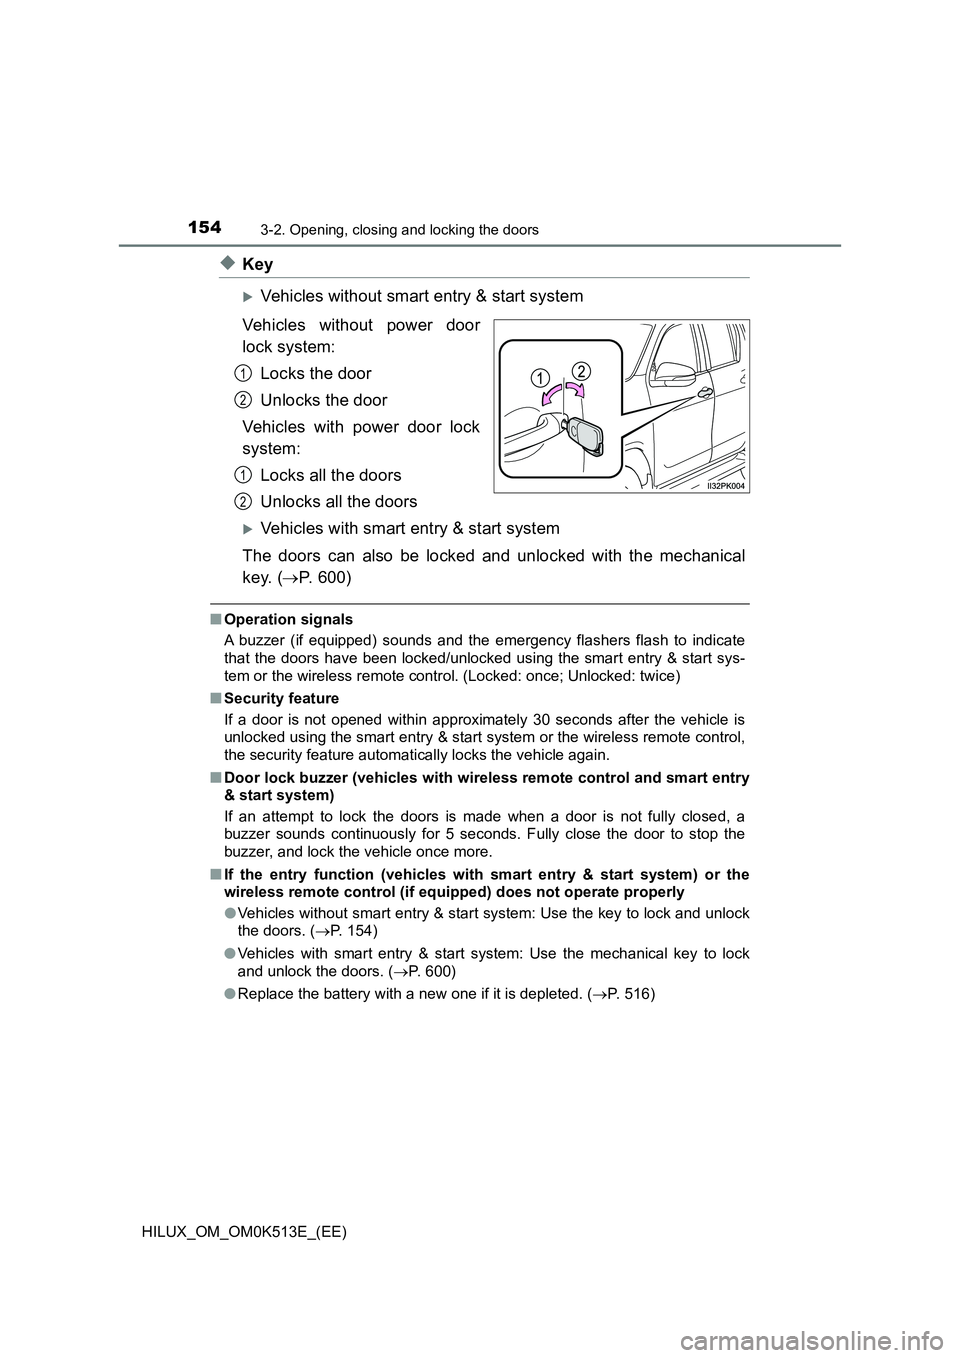 TOYOTA HILUX 2021  Owners Manual (in English) 1543-2. Opening, closing and locking the doors
HILUX_OM_OM0K513E_(EE)
�XKey
Vehicles without smart entry & start system 
Vehicles without power door 
lock system: 
Locks the door 
Unlocks the door 